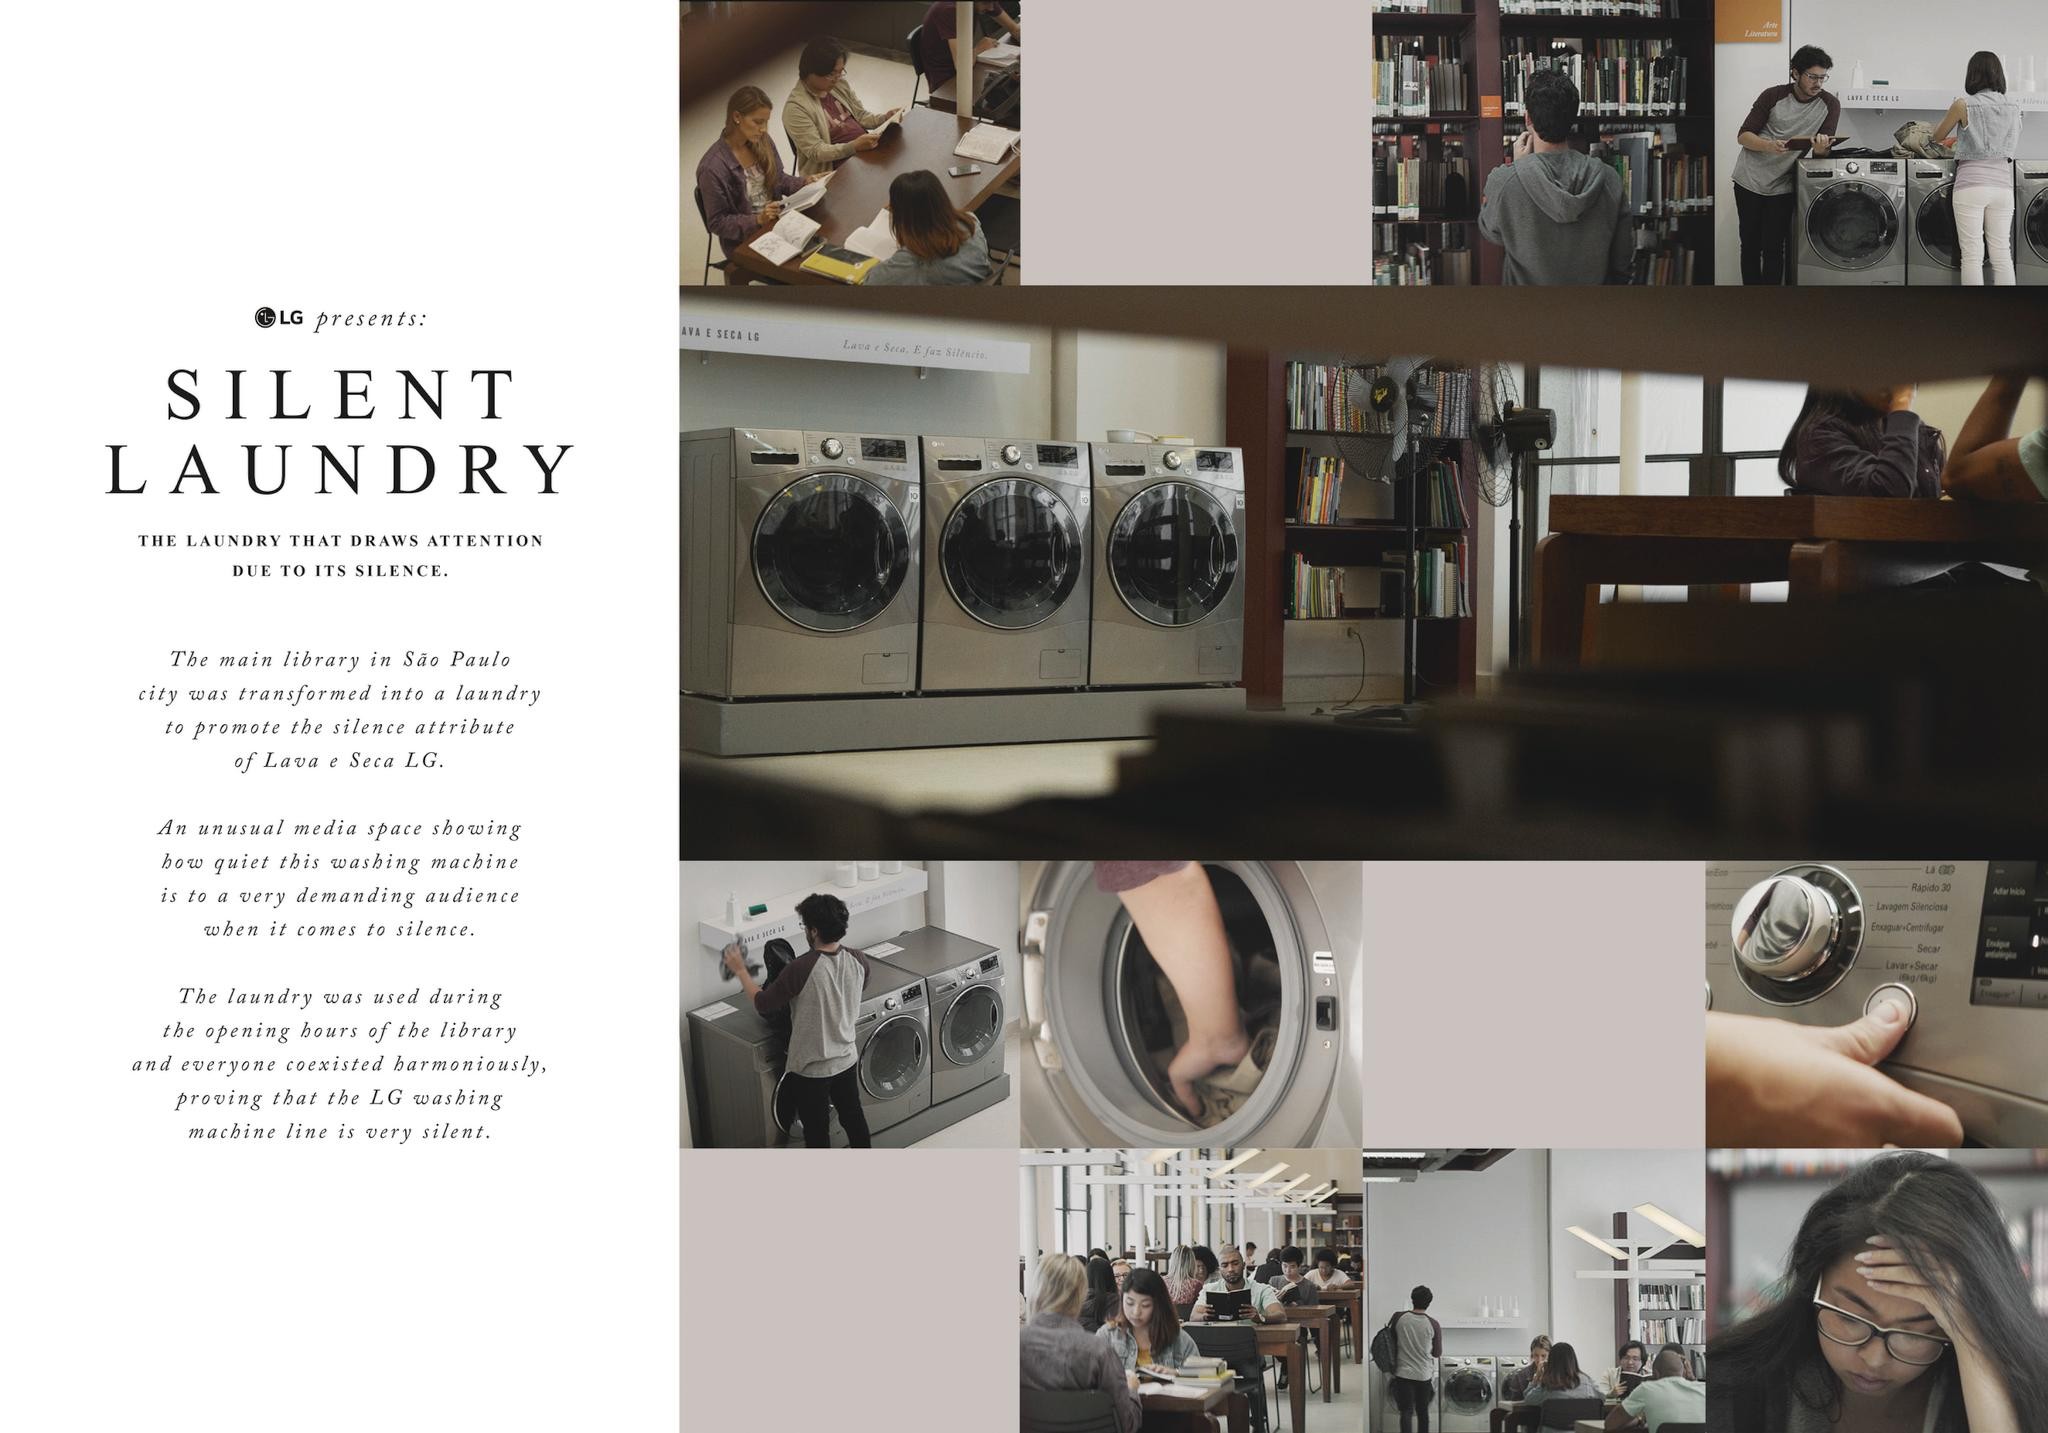 The Silent Laundry